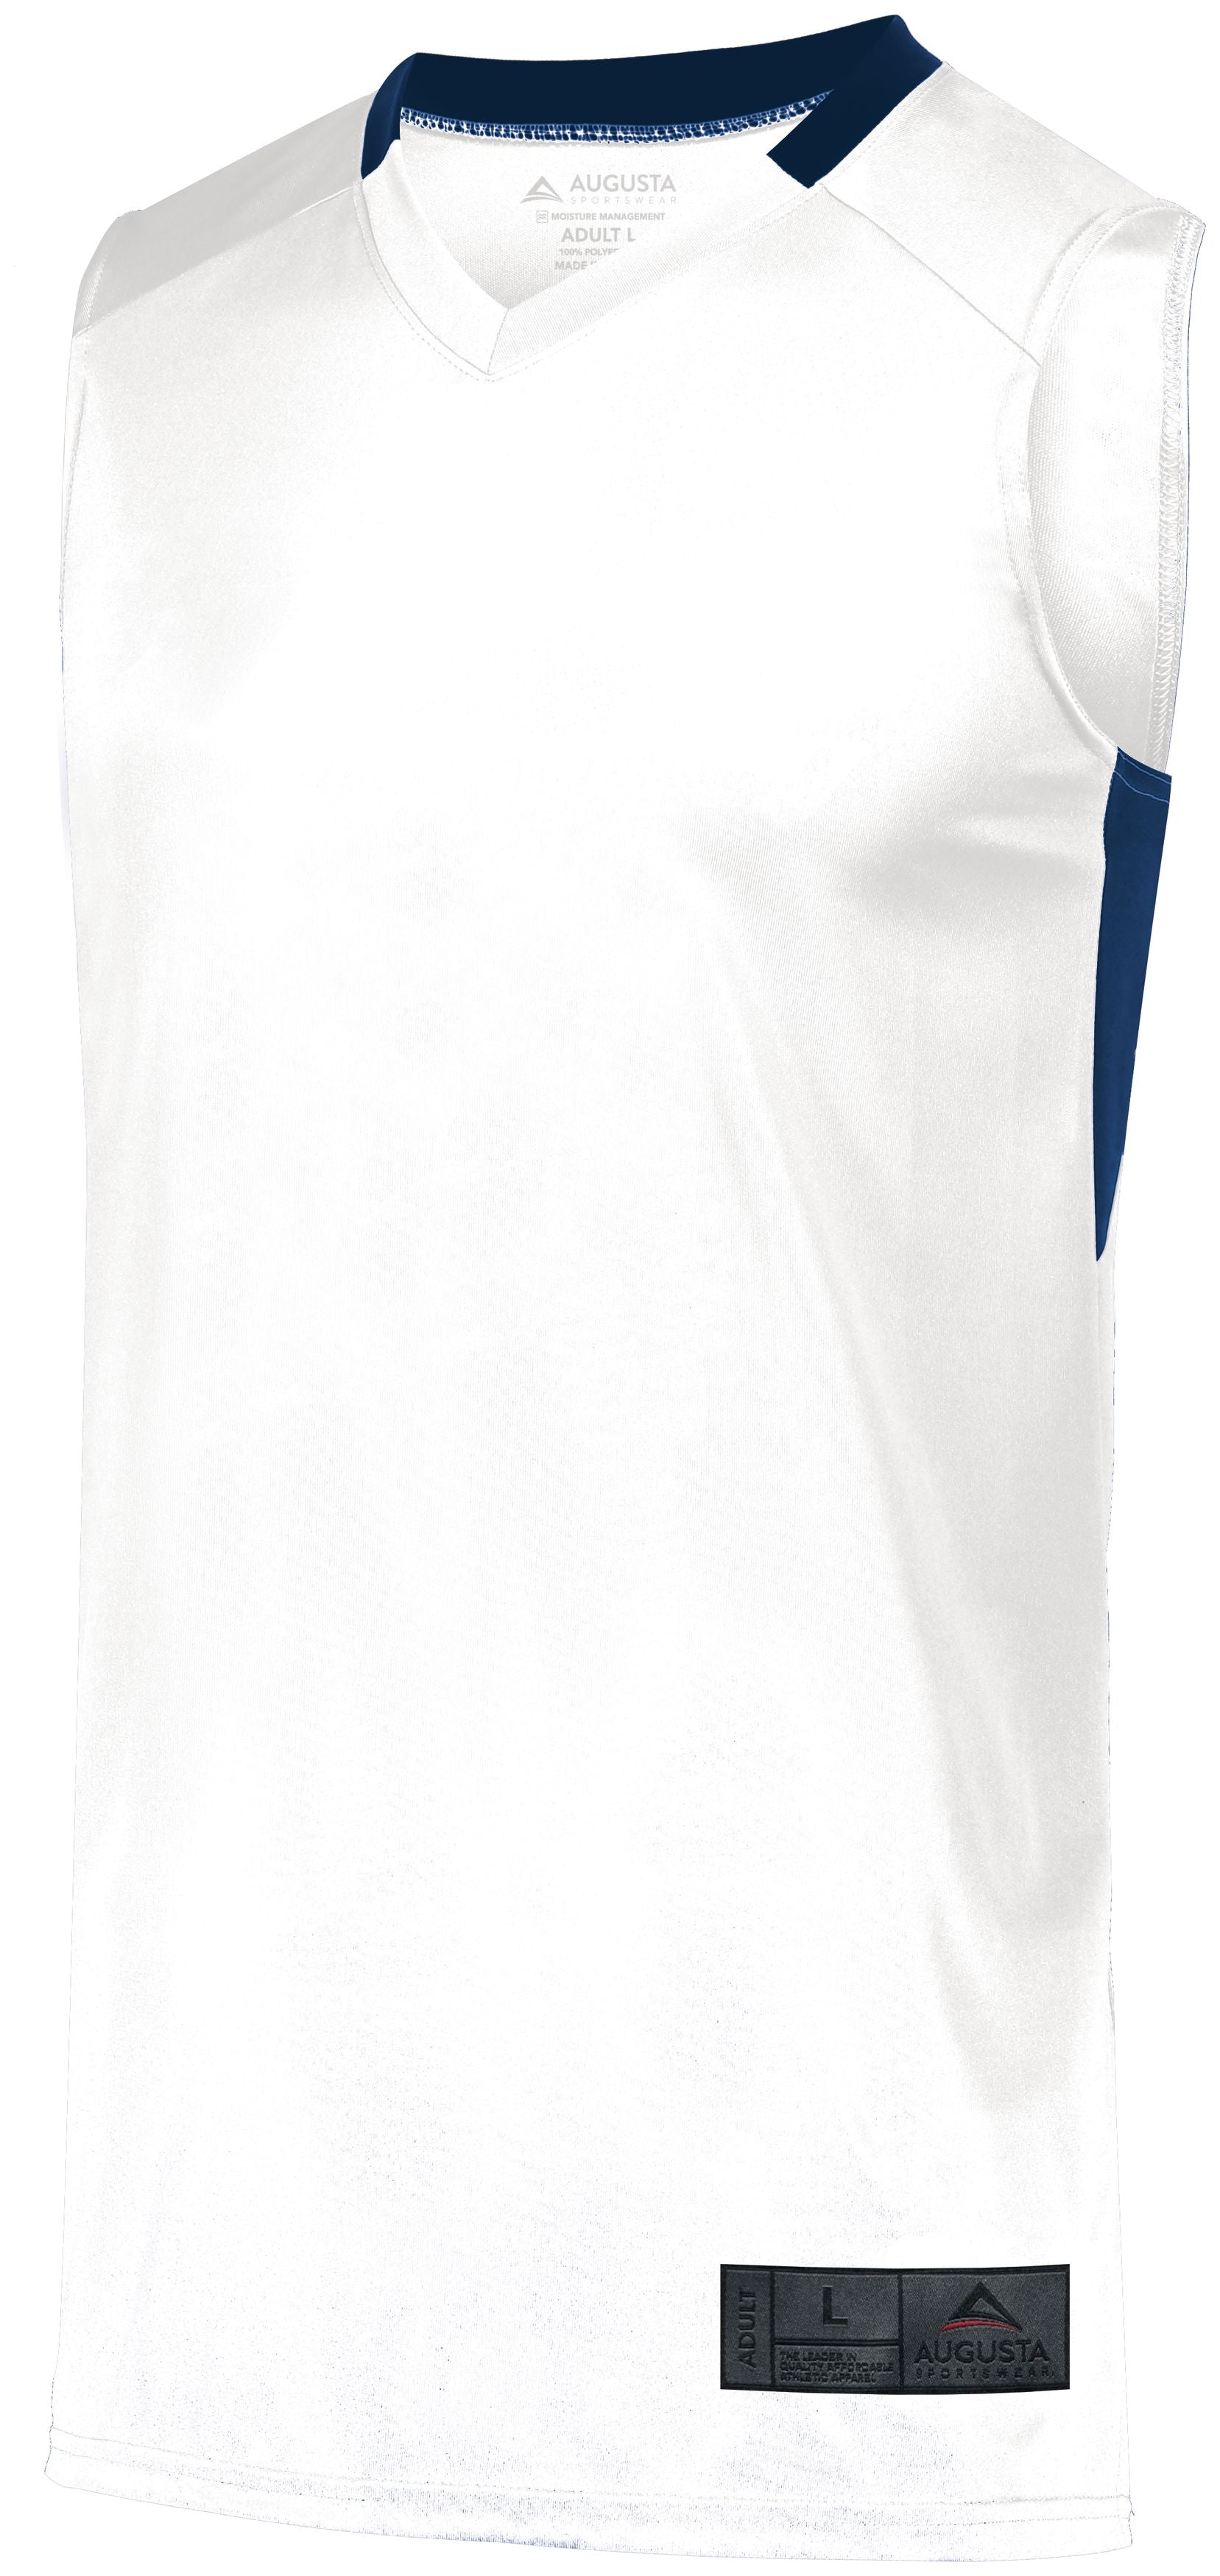 Augusta Sportswear Step-Back Basketball Jersey in White/Navy  -Part of the Adult, Adult-Jersey, Augusta-Products, Basketball, Shirts, All-Sports, All-Sports-1 product lines at KanaleyCreations.com